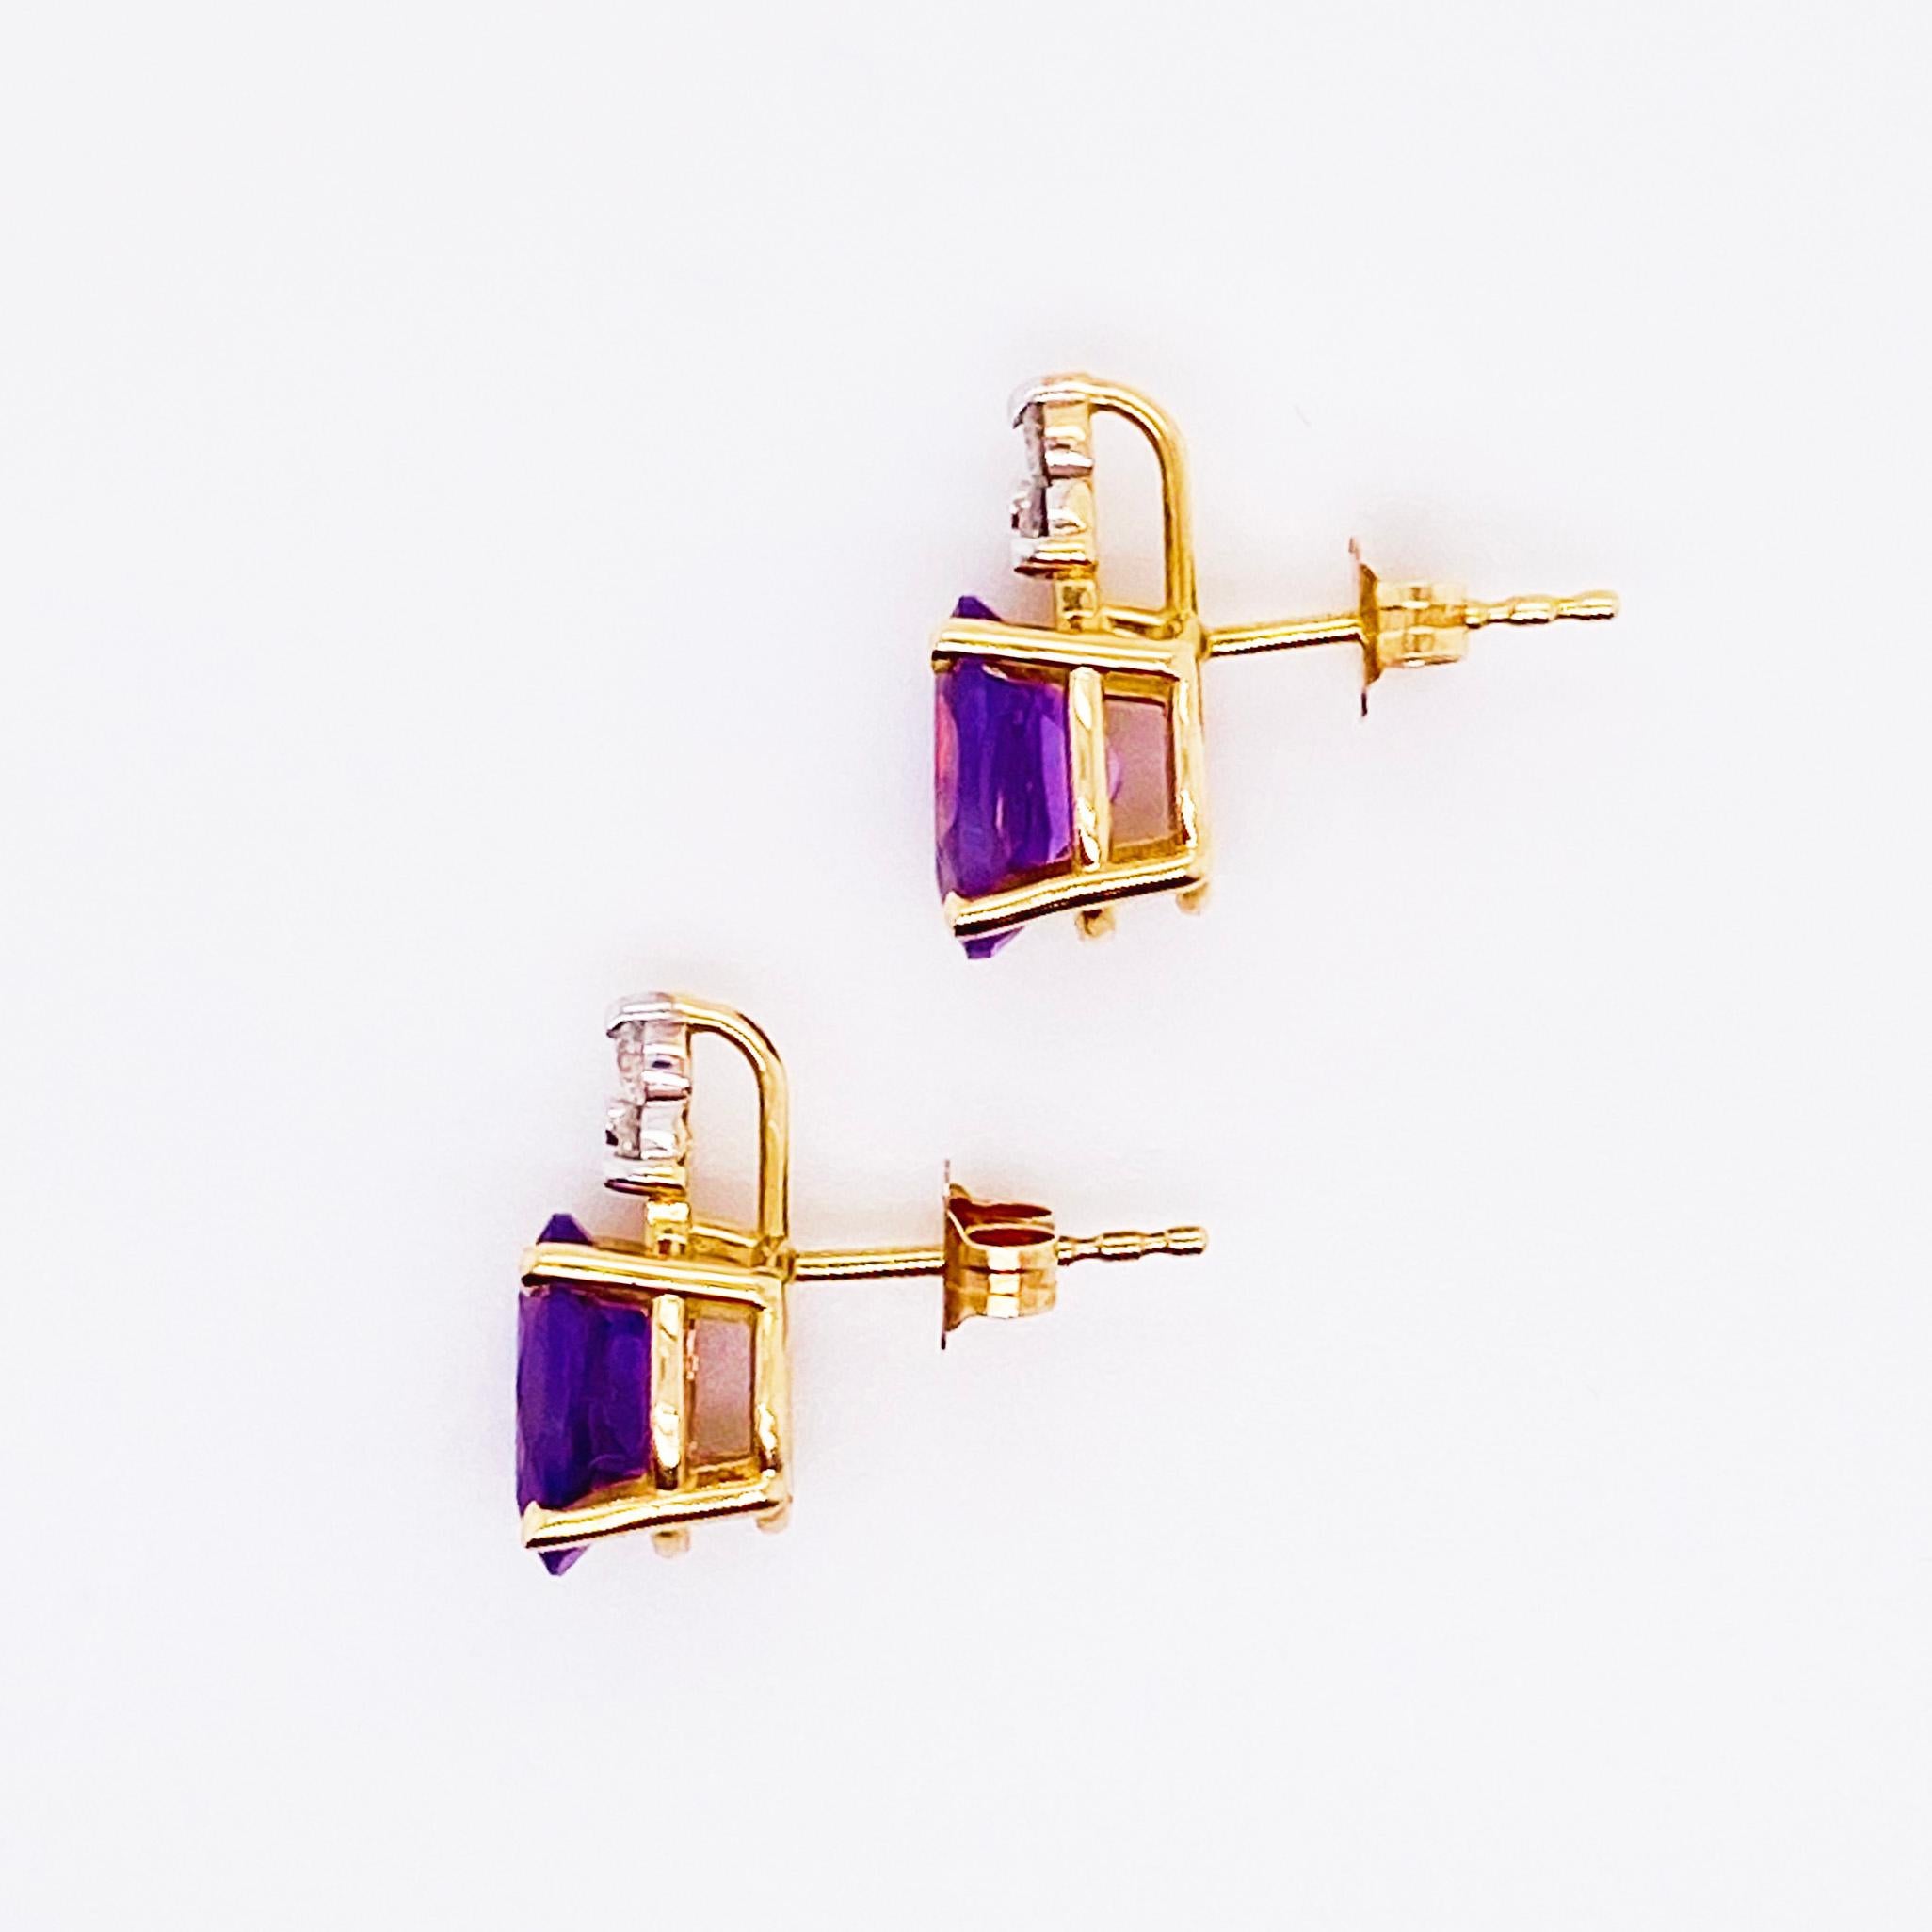 The amethyst and diamond earrings have one oval amethyst gemstone set in 14 karat yellow gold prongs. The oval amethyst gemstones have been hand cut and polished to display maximum brilliance and deep, purple color. Set on top of each is a cluster